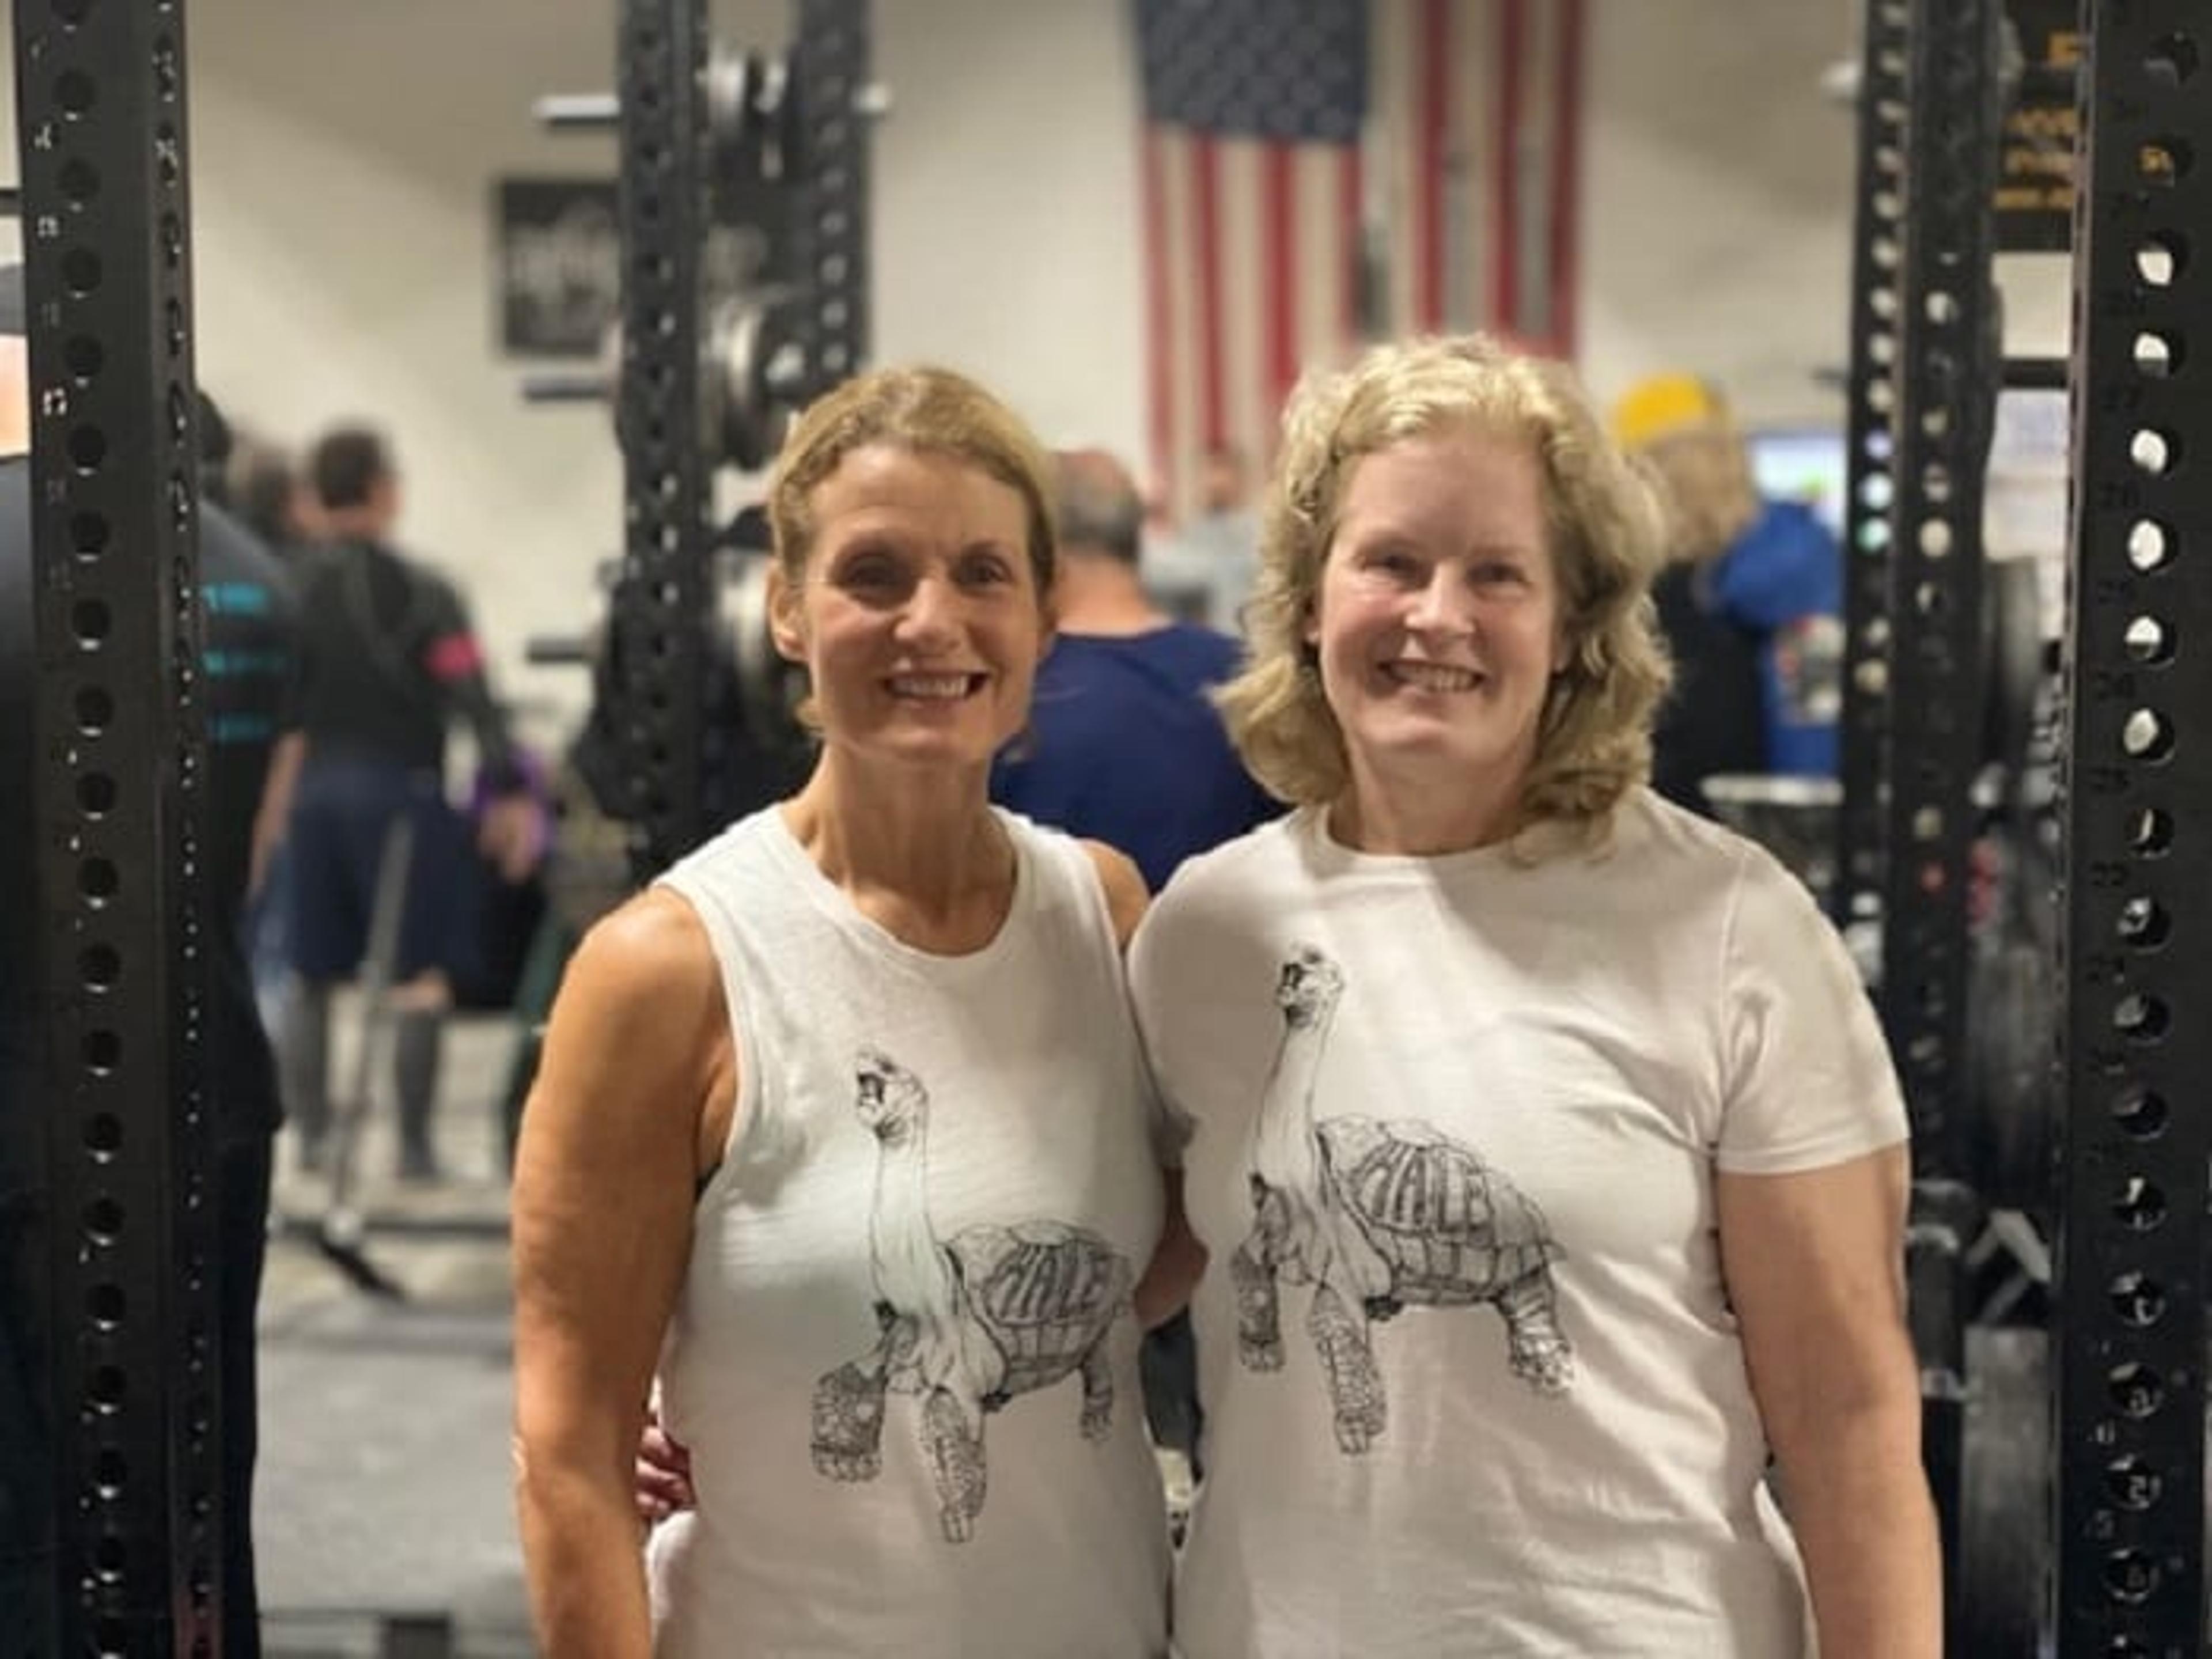 Two 60+ women pose for a photo in a gym